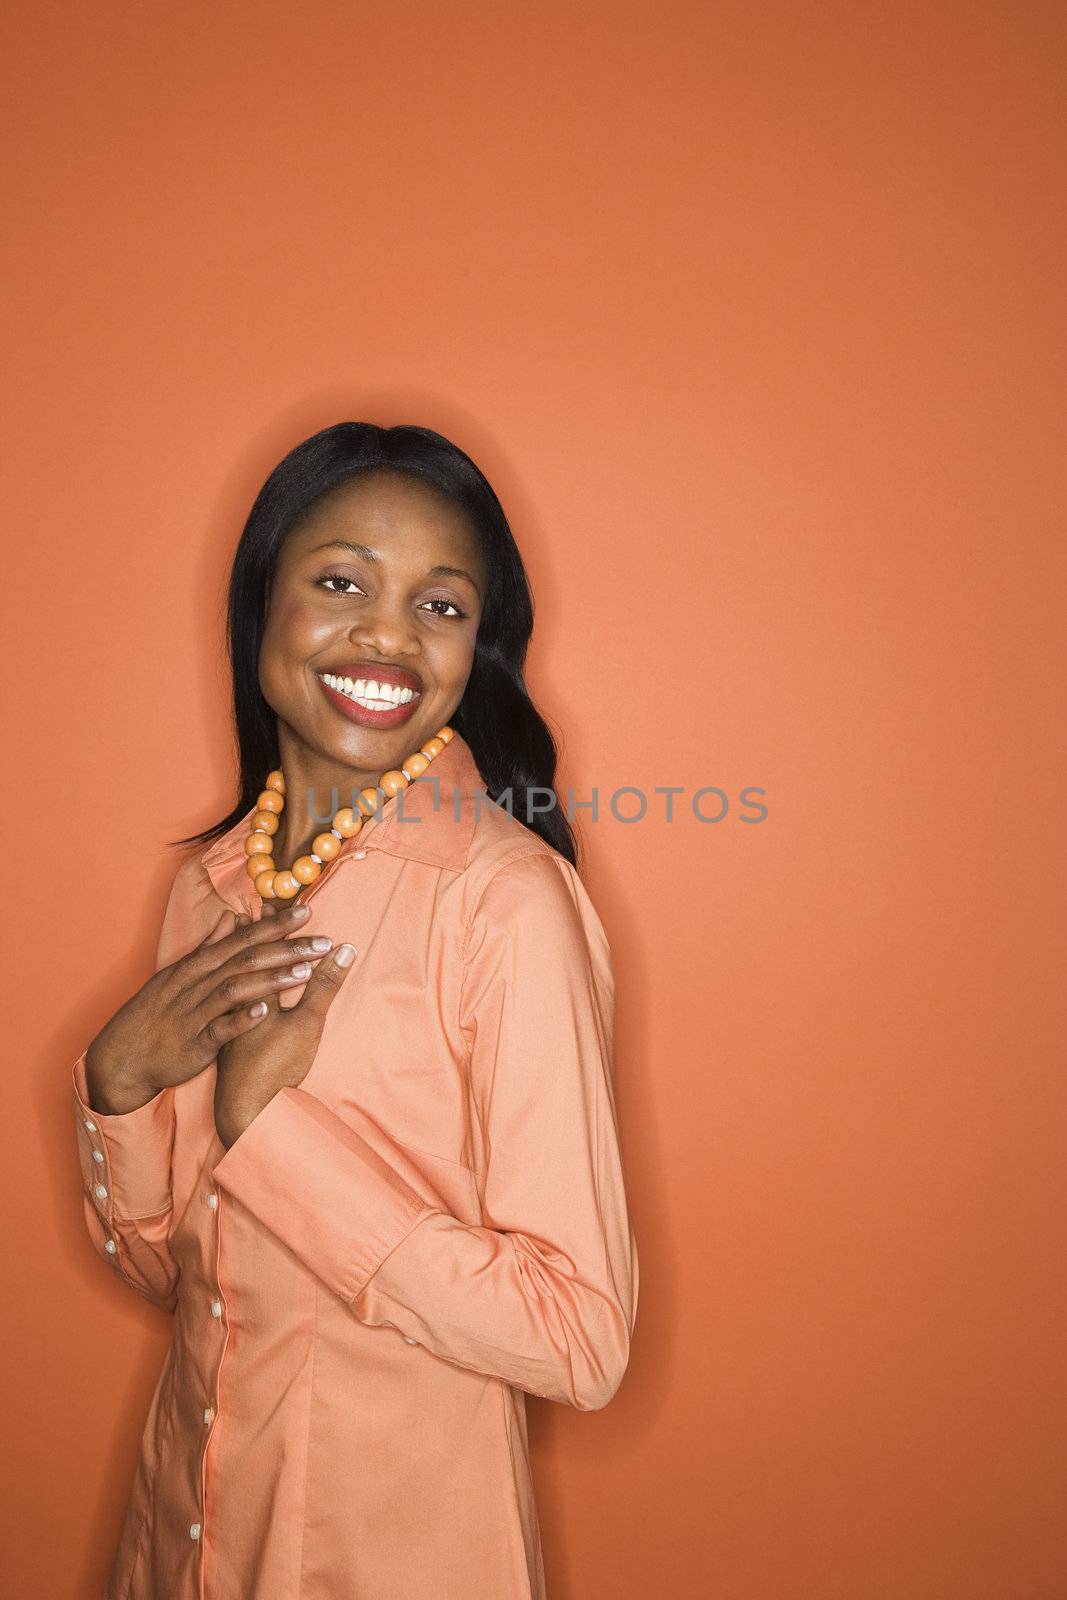 Smiling woman. by iofoto